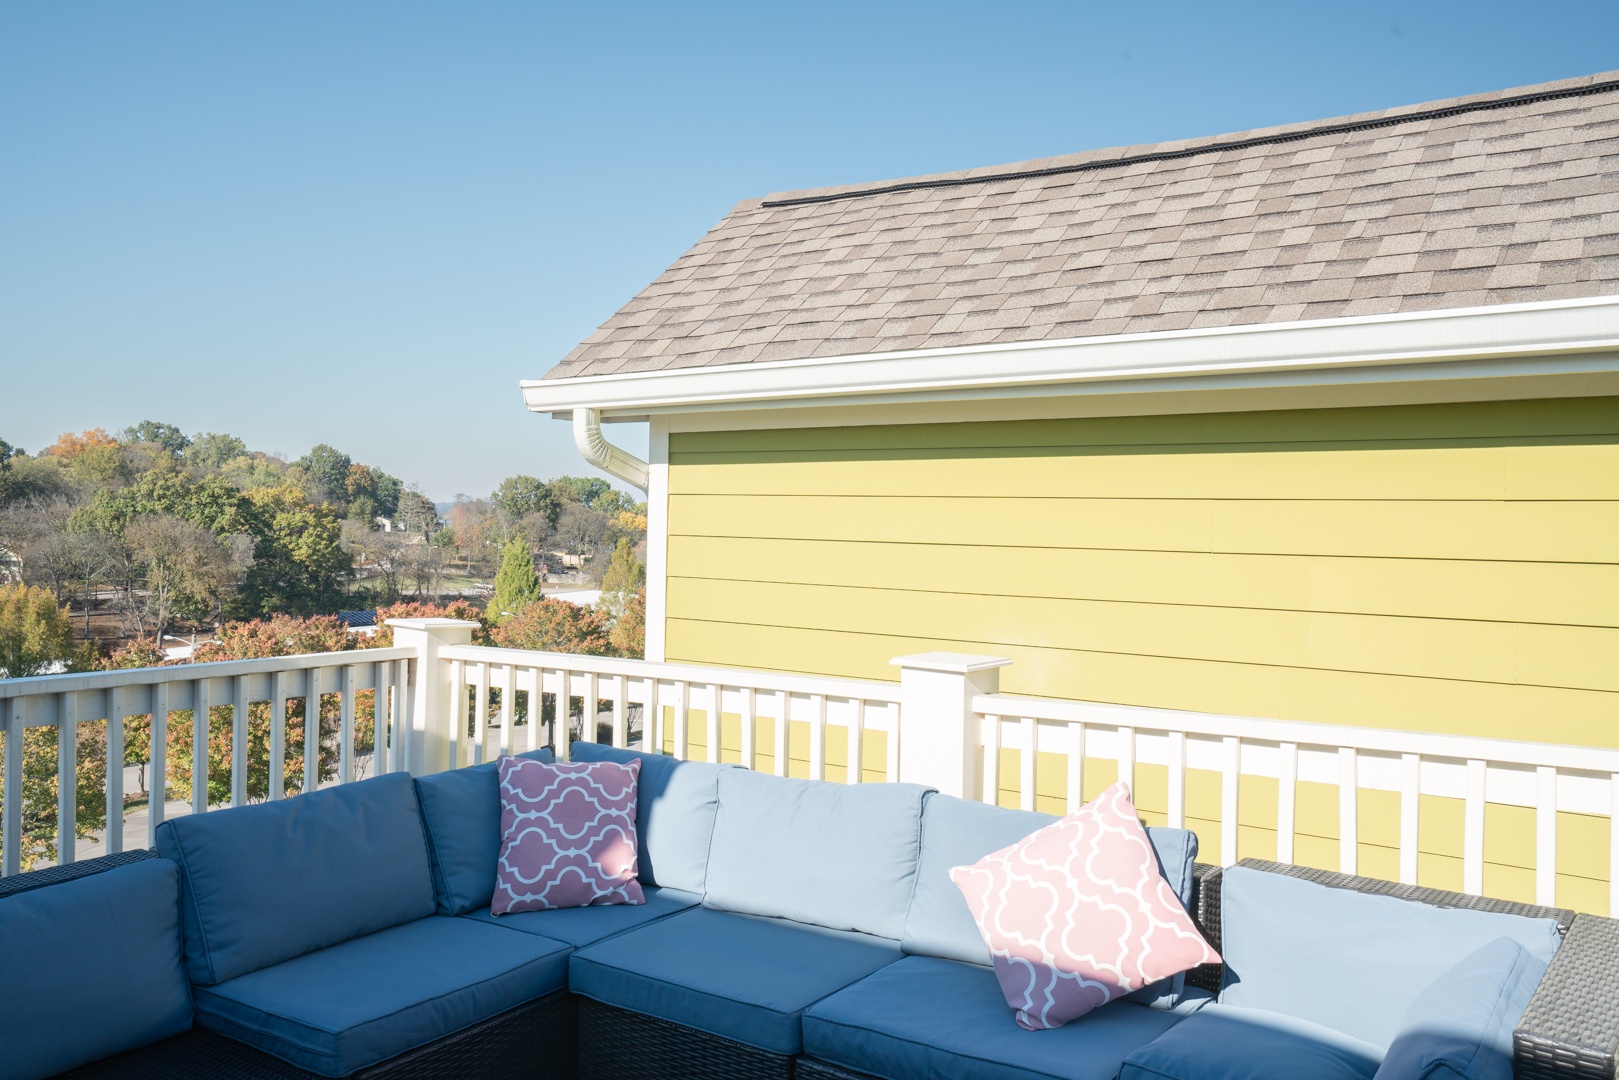 Escape to the 4th floor rooftop deck & soak in the sun